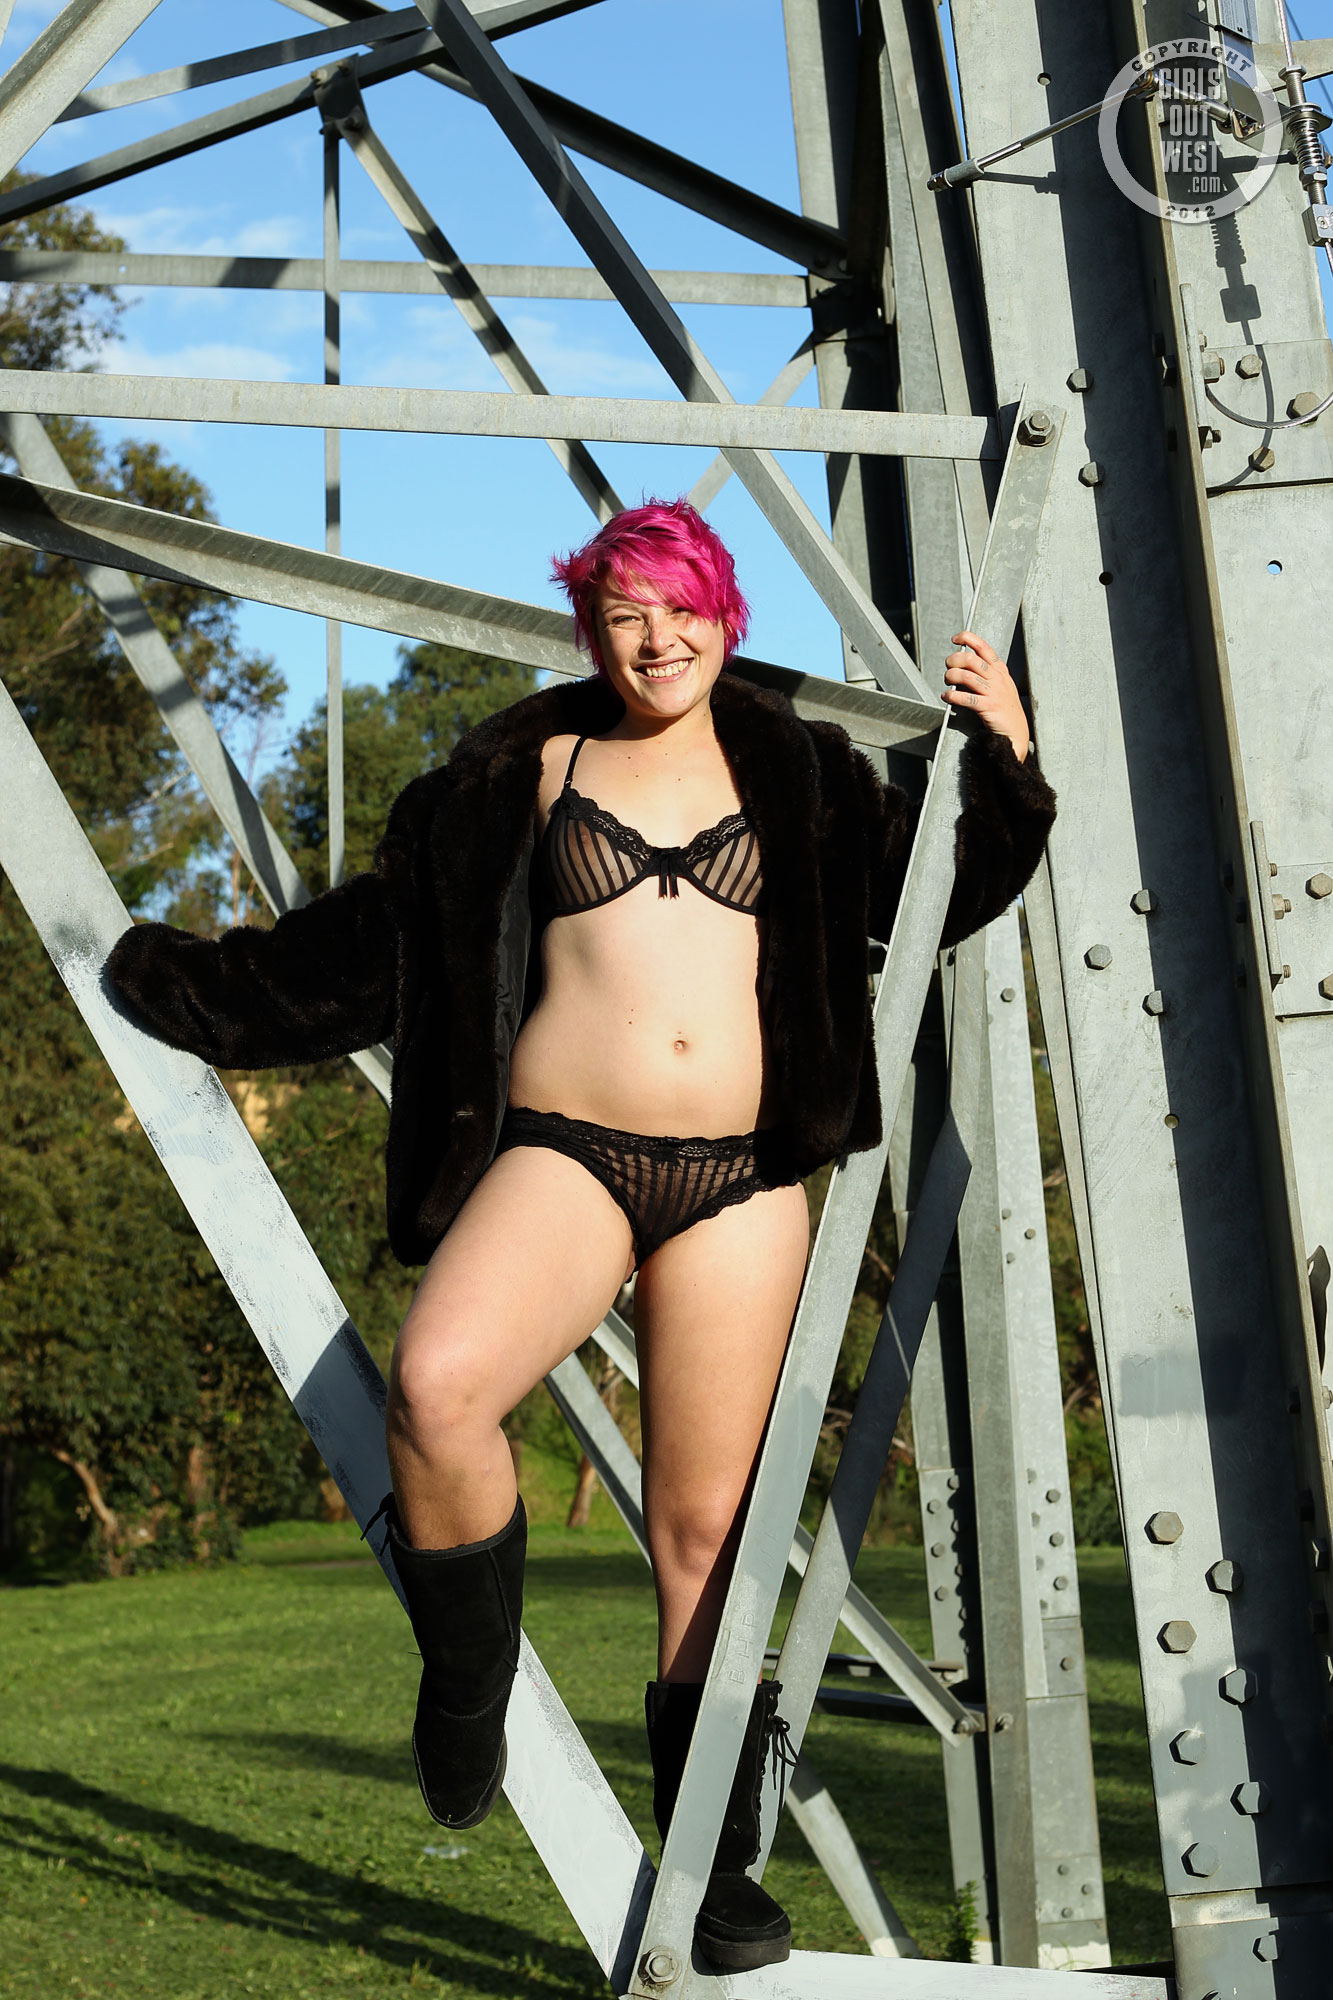 wpid-pink-haired-amateur-franky-flashing-her-pussy-outside-in-her-boots-and-coat1.jpg